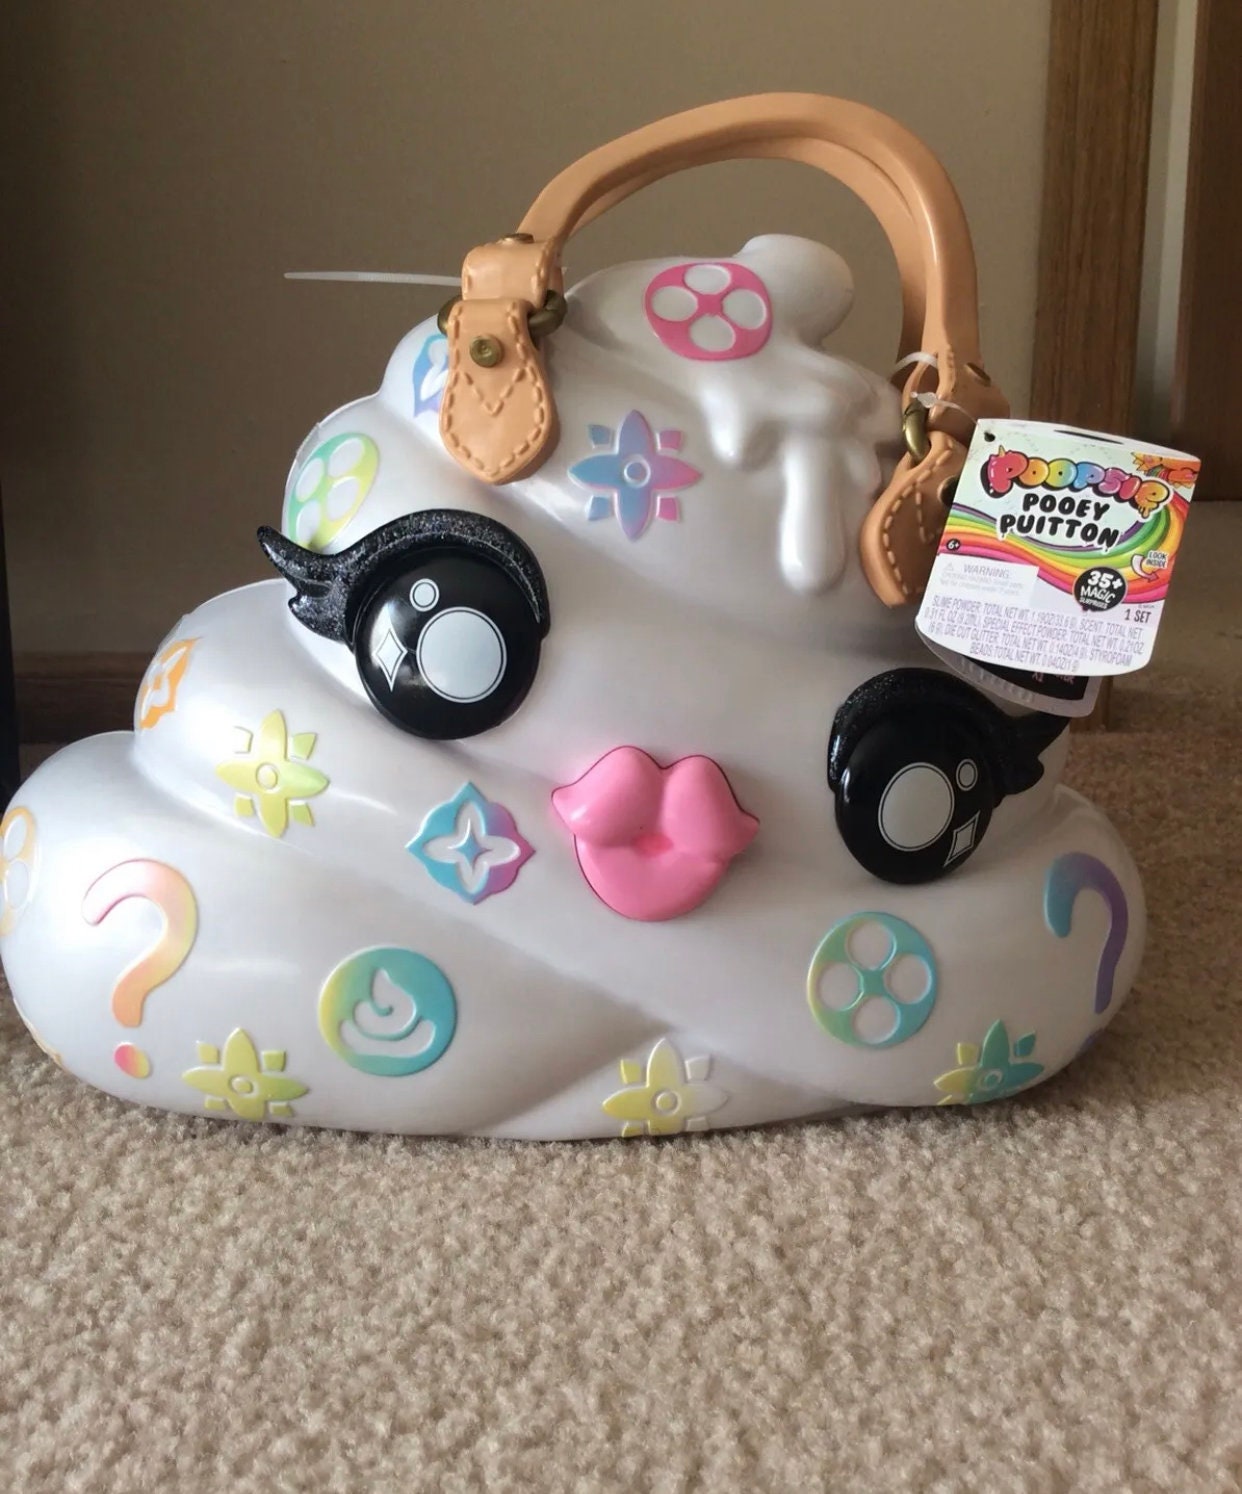 Poopsie Pooey Puitton Surprise Slime Kit & Carrying Case Purse 